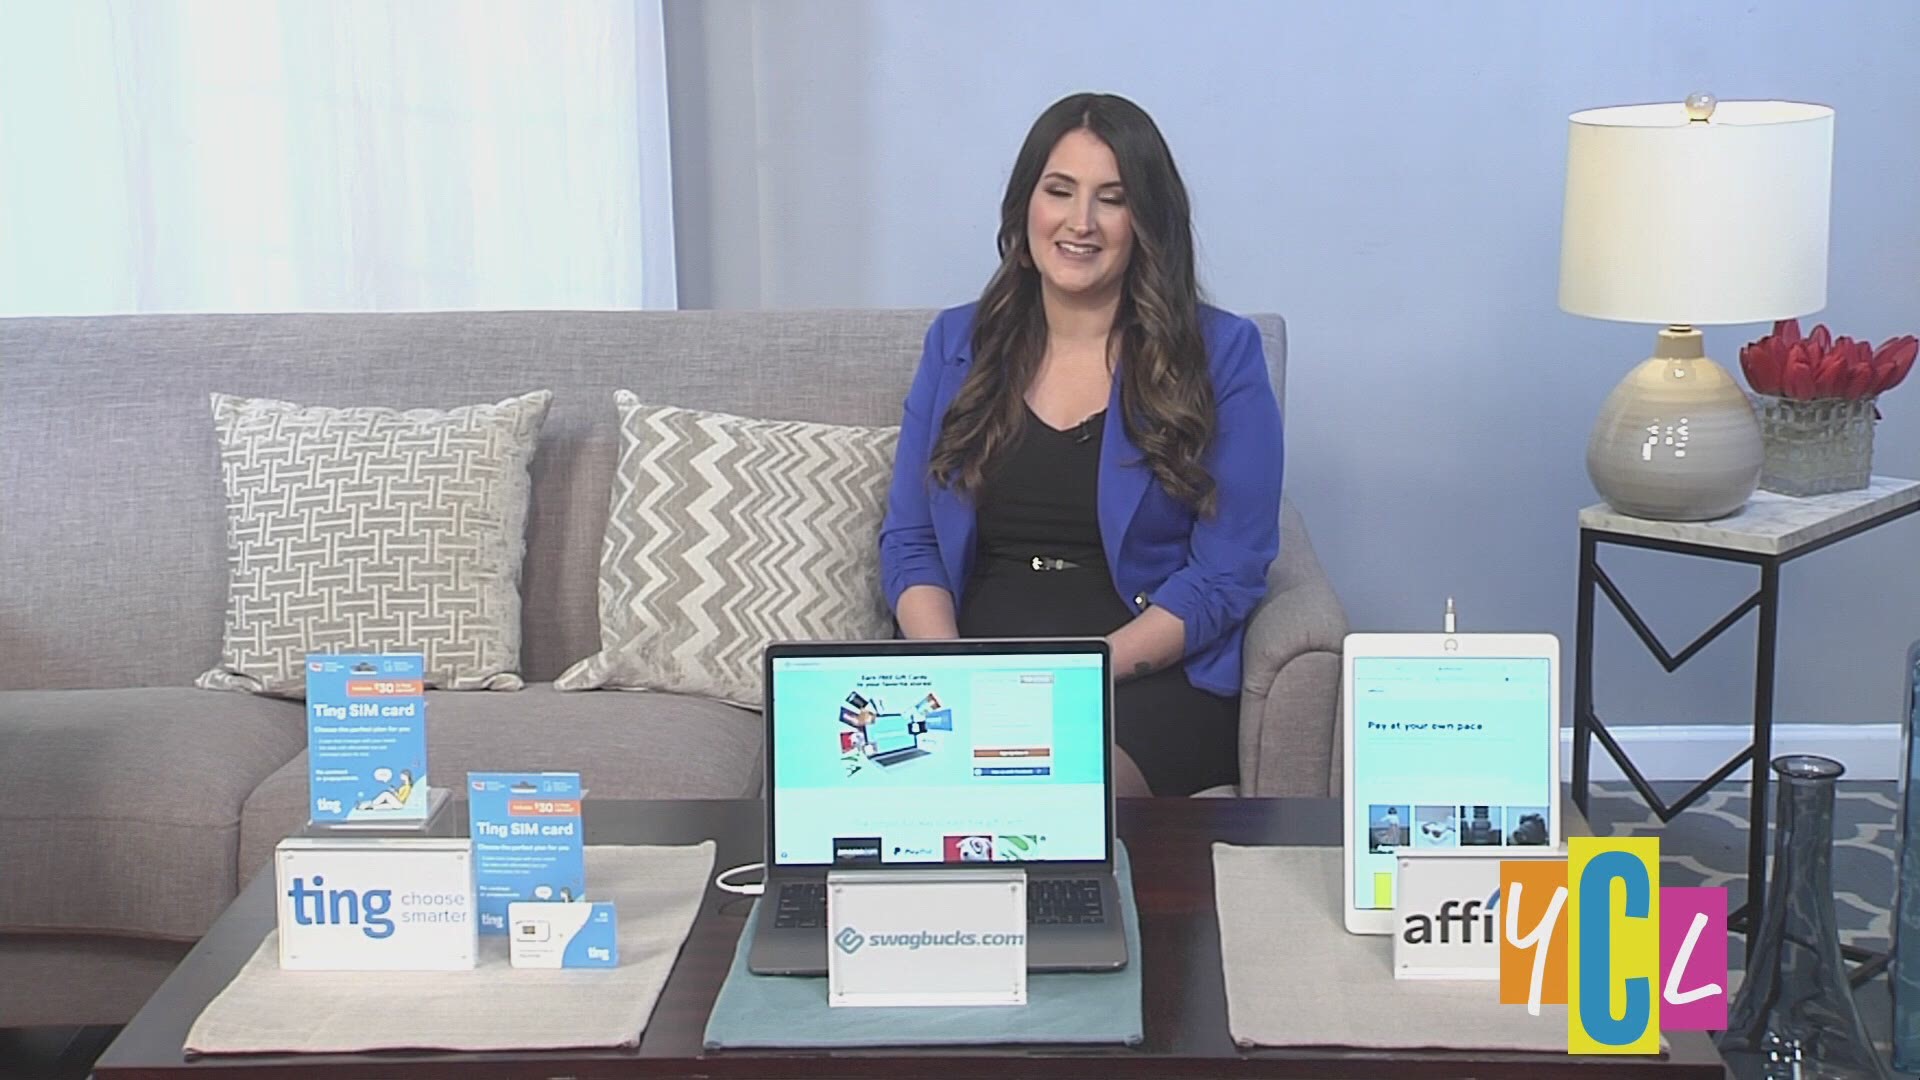 Savings Expert Lauren Greutman explains how consumers can take control of their money in 2021.
This segment was paid for by Affirm, swagbucks and Ting Mobile.